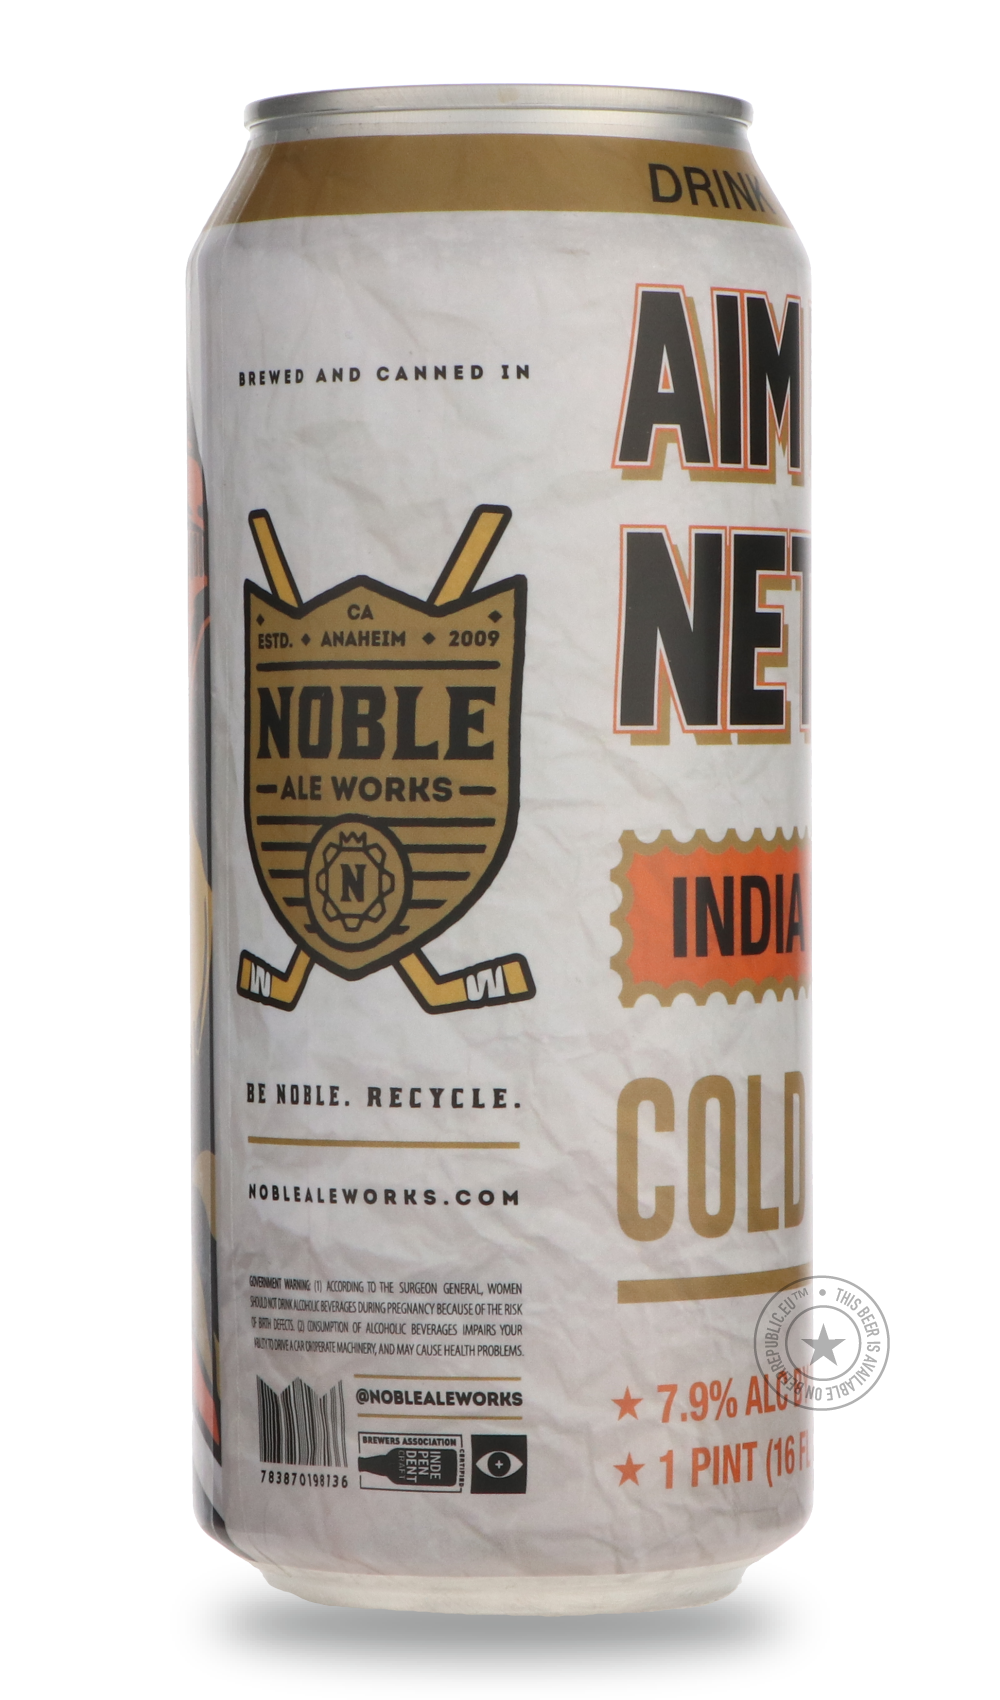 -Noble- Aim For the Netses!-IPA- Only @ Beer Republic - The best online beer store for American & Canadian craft beer - Buy beer online from the USA and Canada - Bier online kopen - Amerikaans bier kopen - Craft beer store - Craft beer kopen - Amerikanisch bier kaufen - Bier online kaufen - Acheter biere online - IPA - Stout - Porter - New England IPA - Hazy IPA - Imperial Stout - Barrel Aged - Barrel Aged Imperial Stout - Brown - Dark beer - Blond - Blonde - Pilsner - Lager - Wheat - Weizen - Amber - Barle